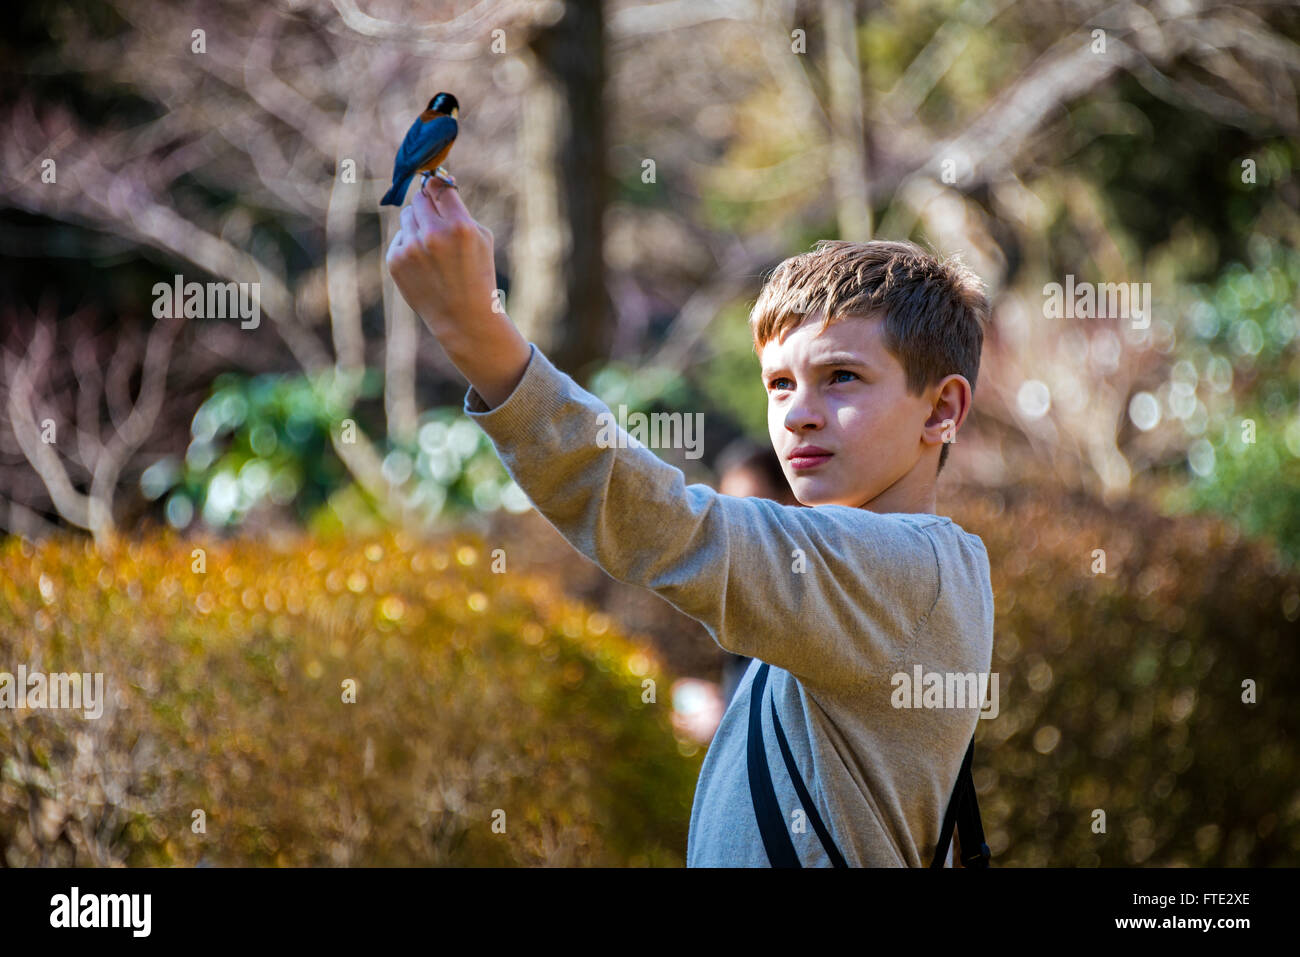 Boy with wild bird perched on his hand Stock Photo